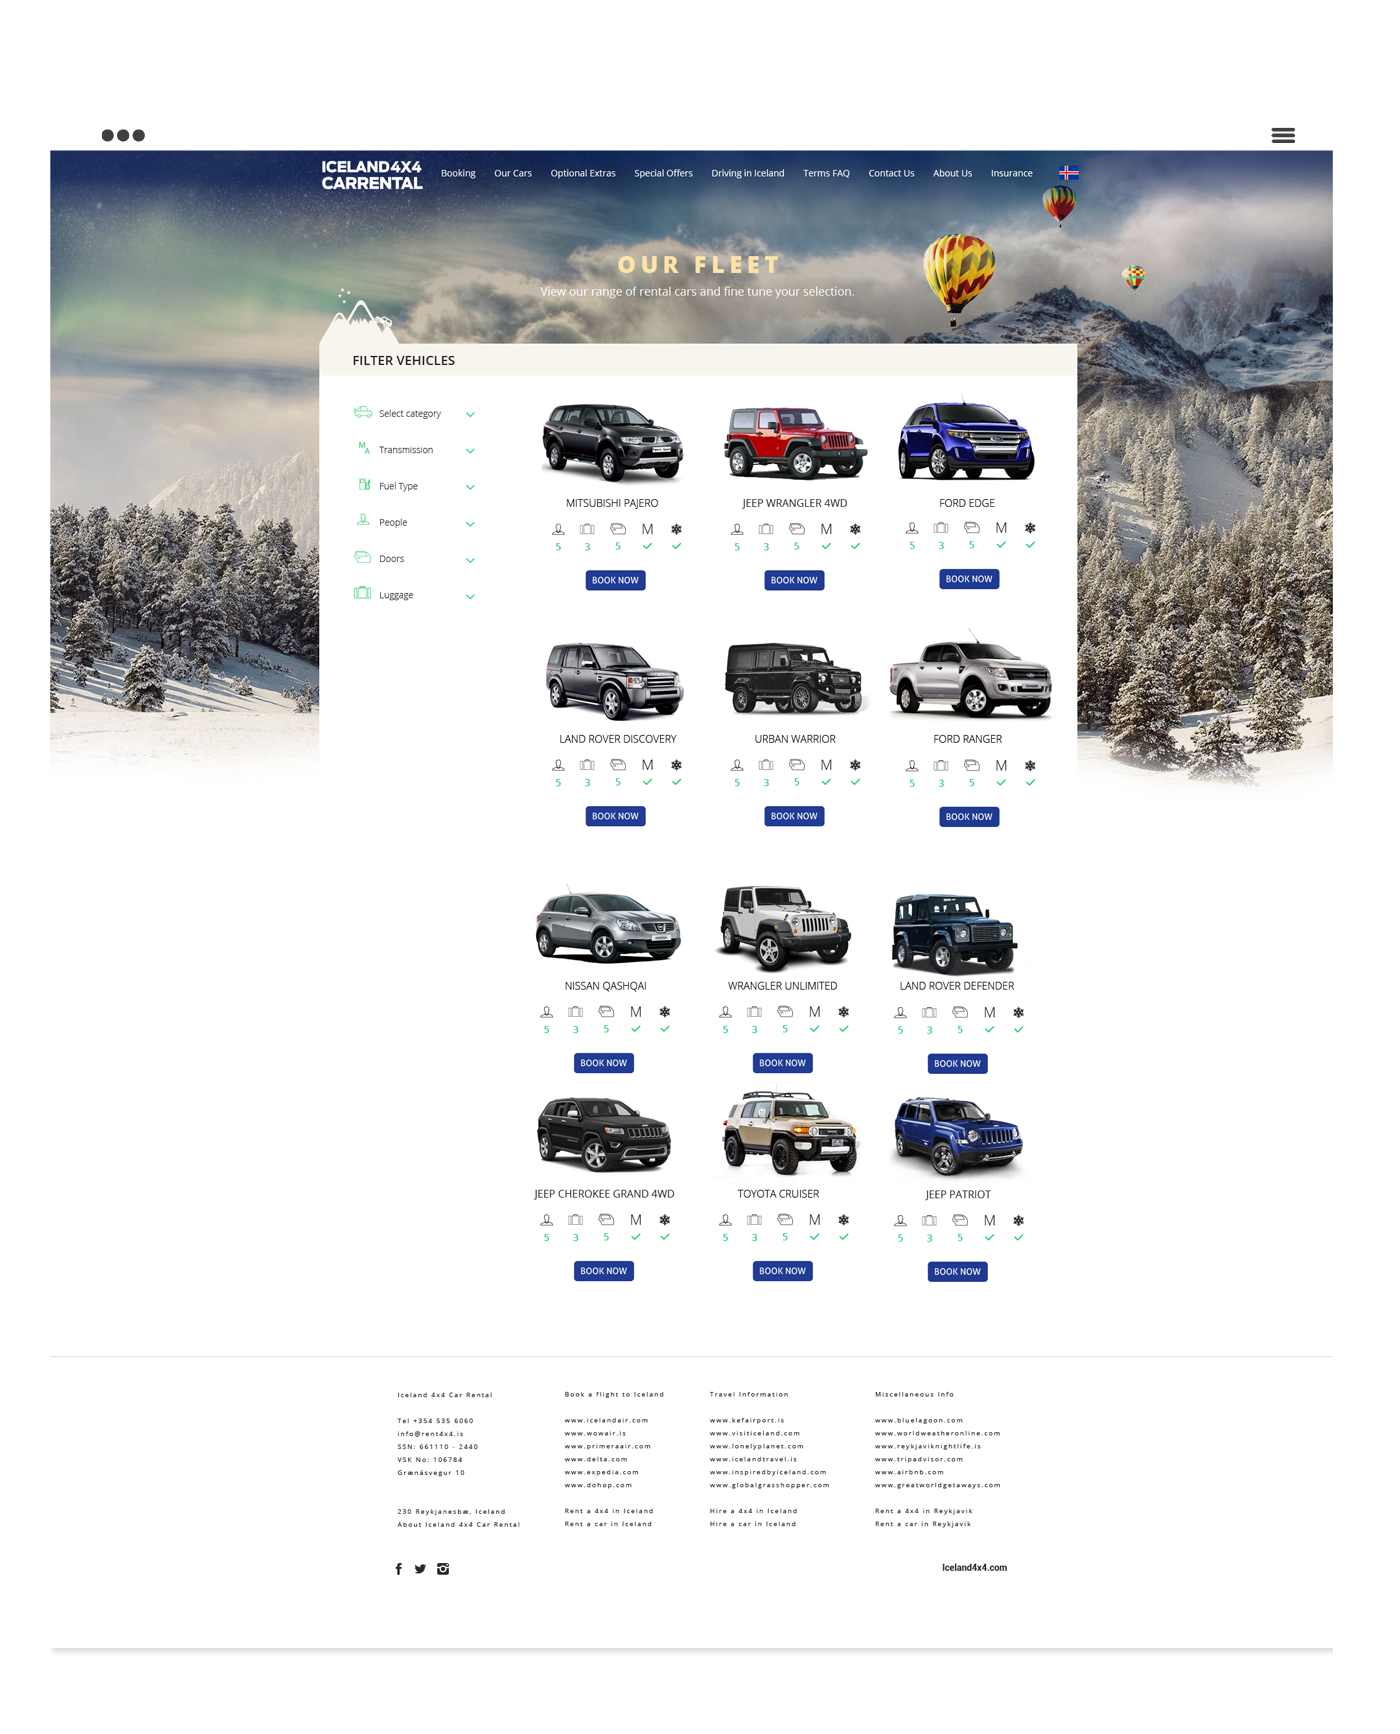 car rental Ecommerce Booking book iceland trip 4x4 jeep